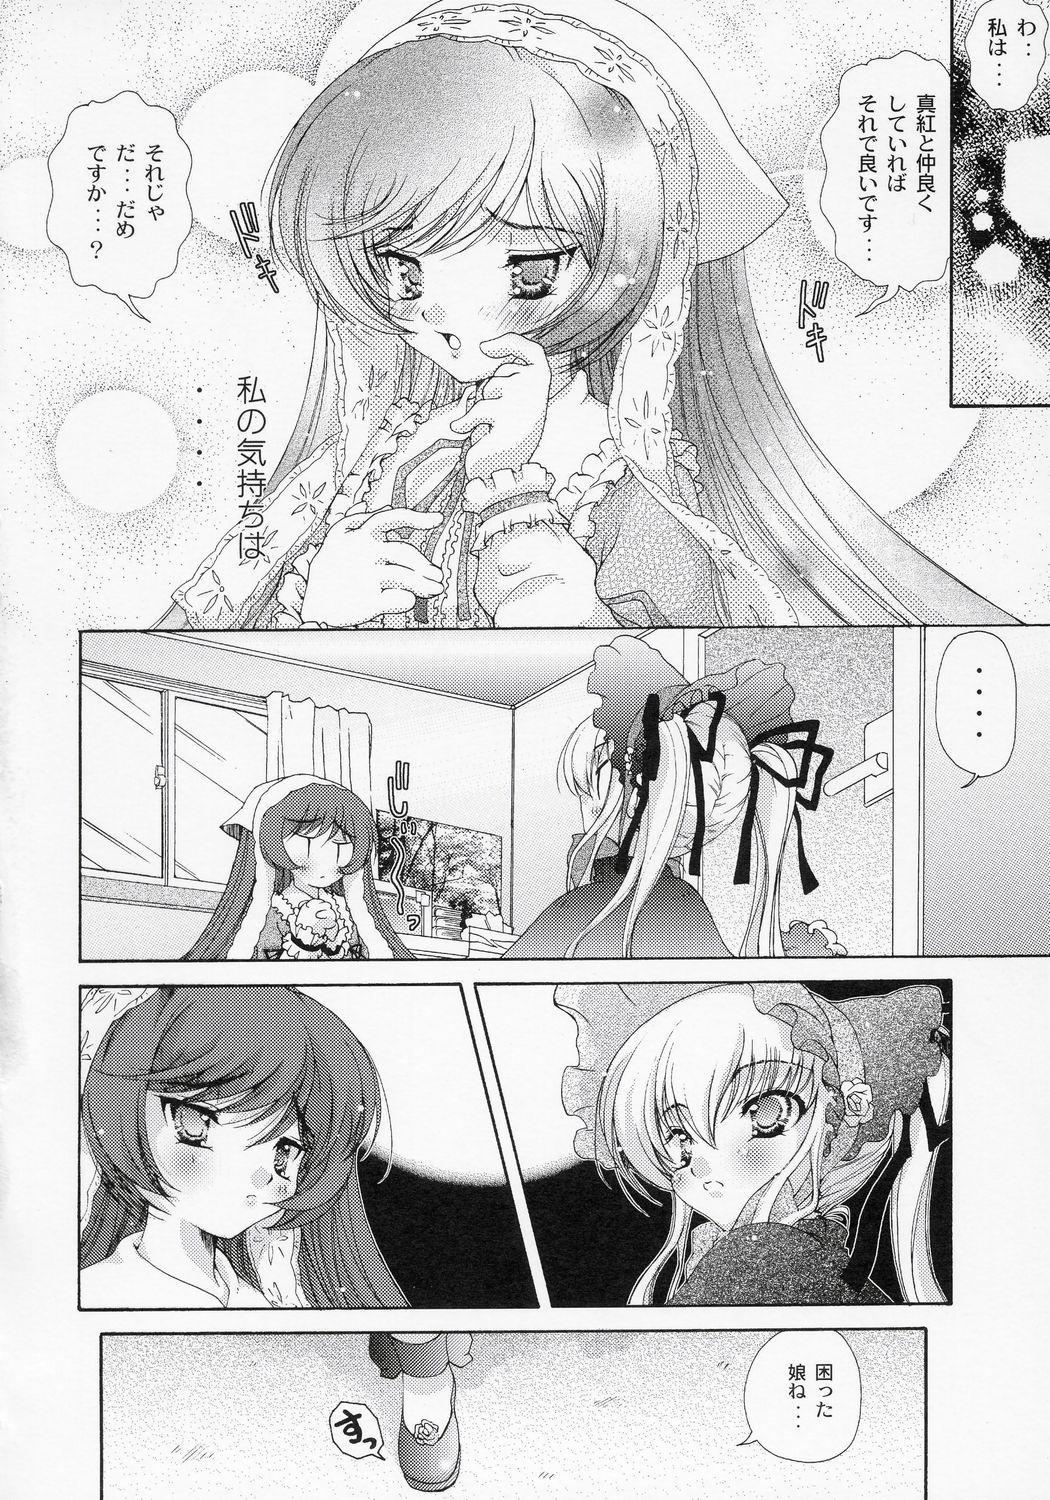 Actress Dolls Party - Rozen maiden Hot Girls Getting Fucked - Page 7